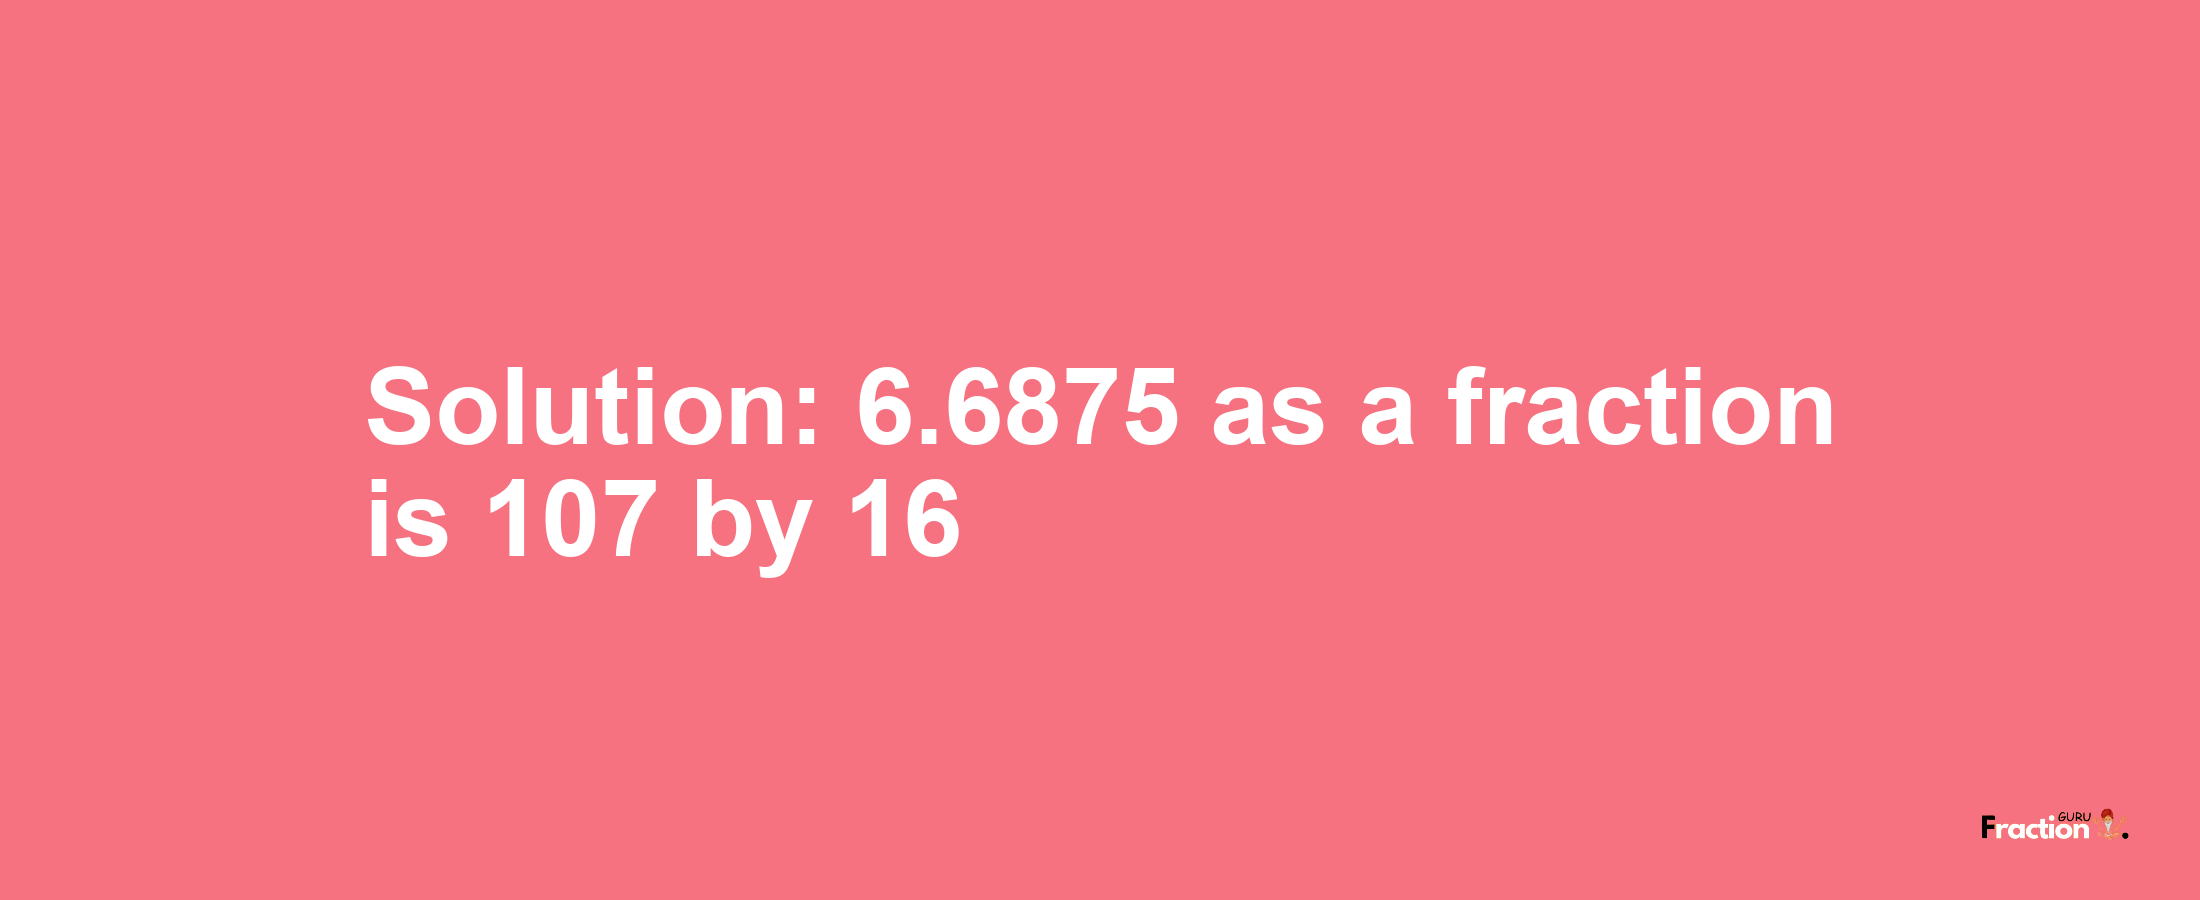 Solution:6.6875 as a fraction is 107/16